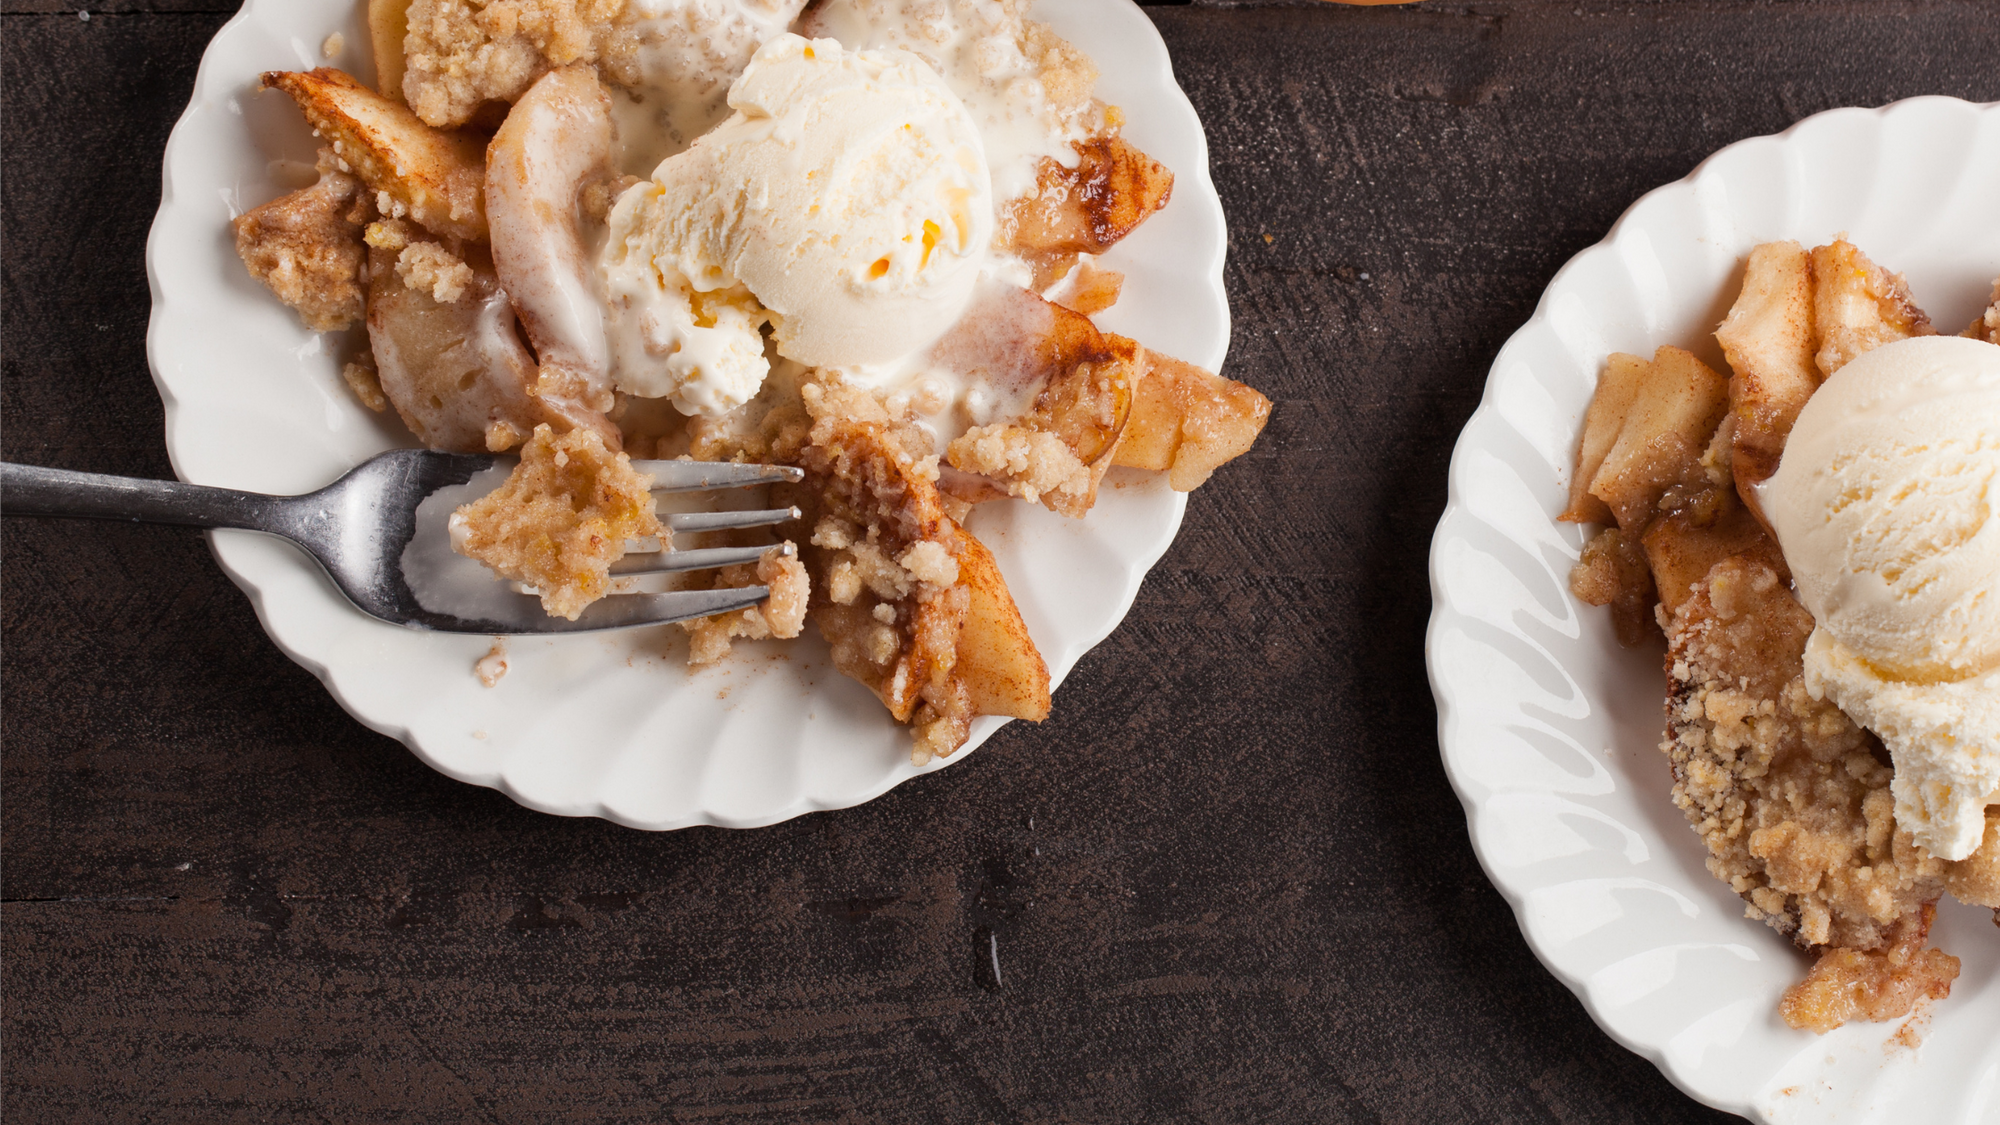 Easy and Delicious Apple Crisp Recipe blog post. A scene of two plates of warm apple crisp with a scoop of vanilla ice cream.